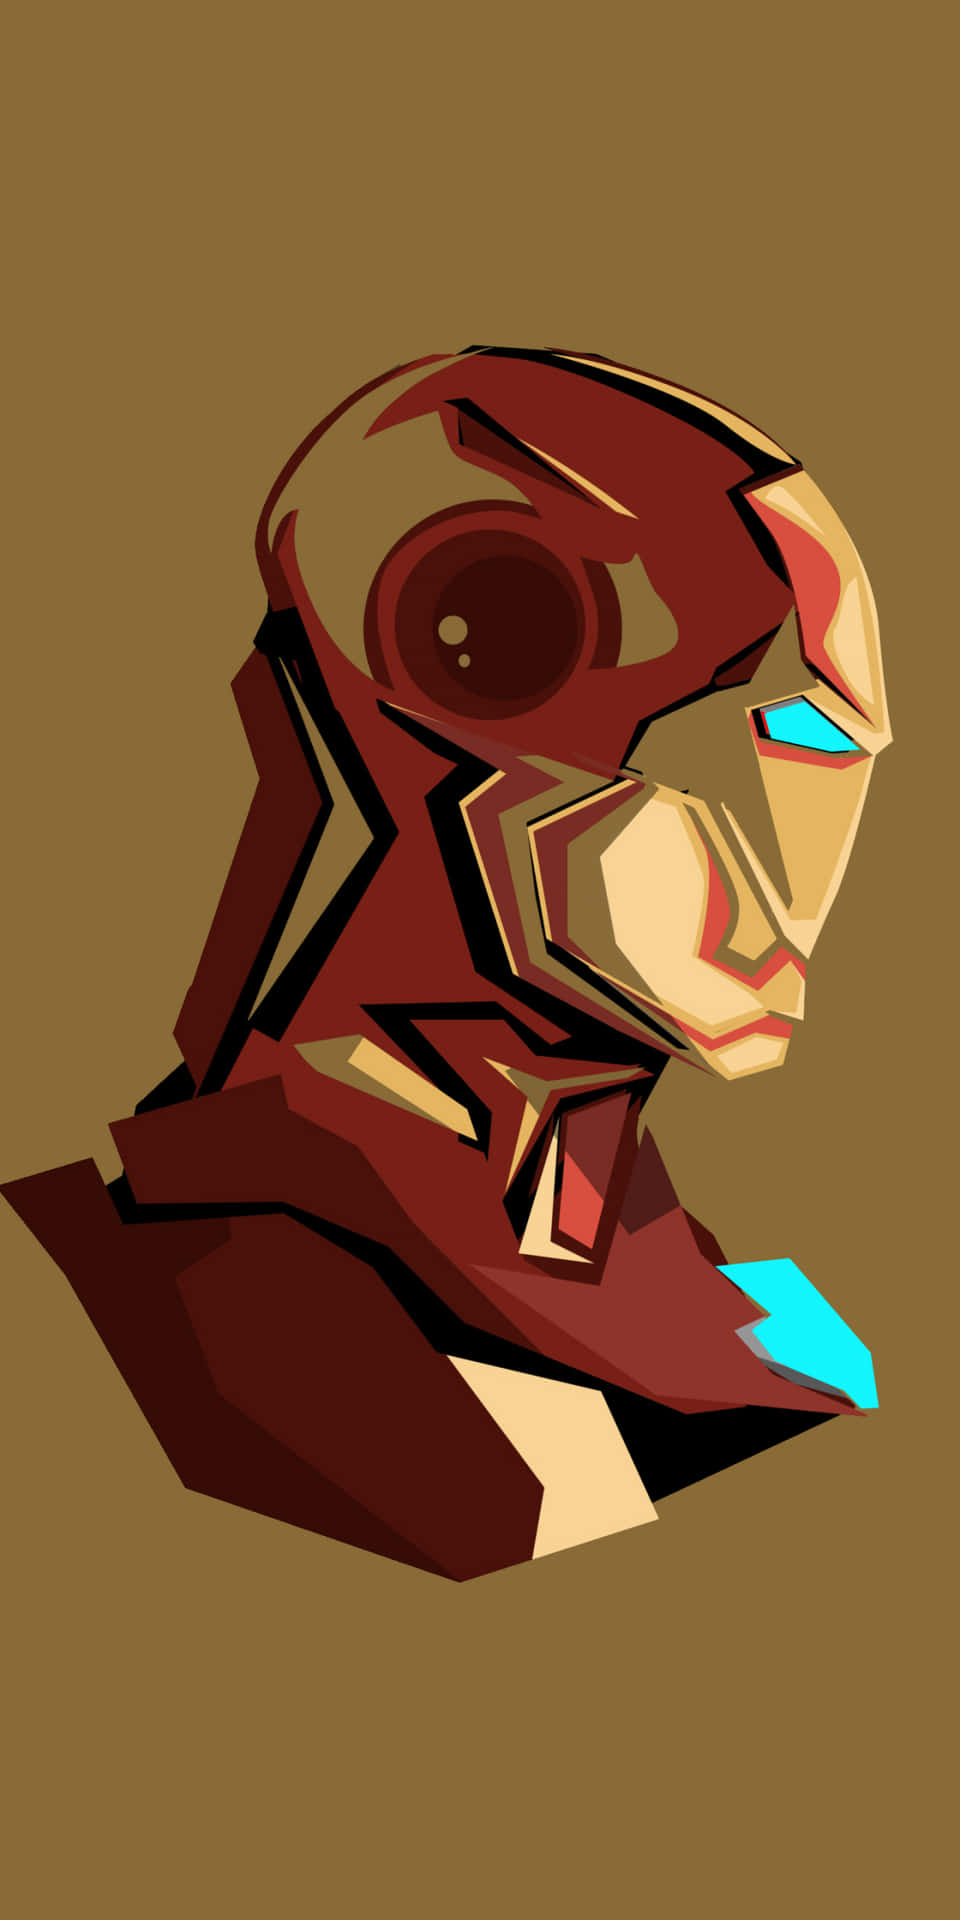 Pixel 3 Iron Man Poppehoved baggrundsdesign.